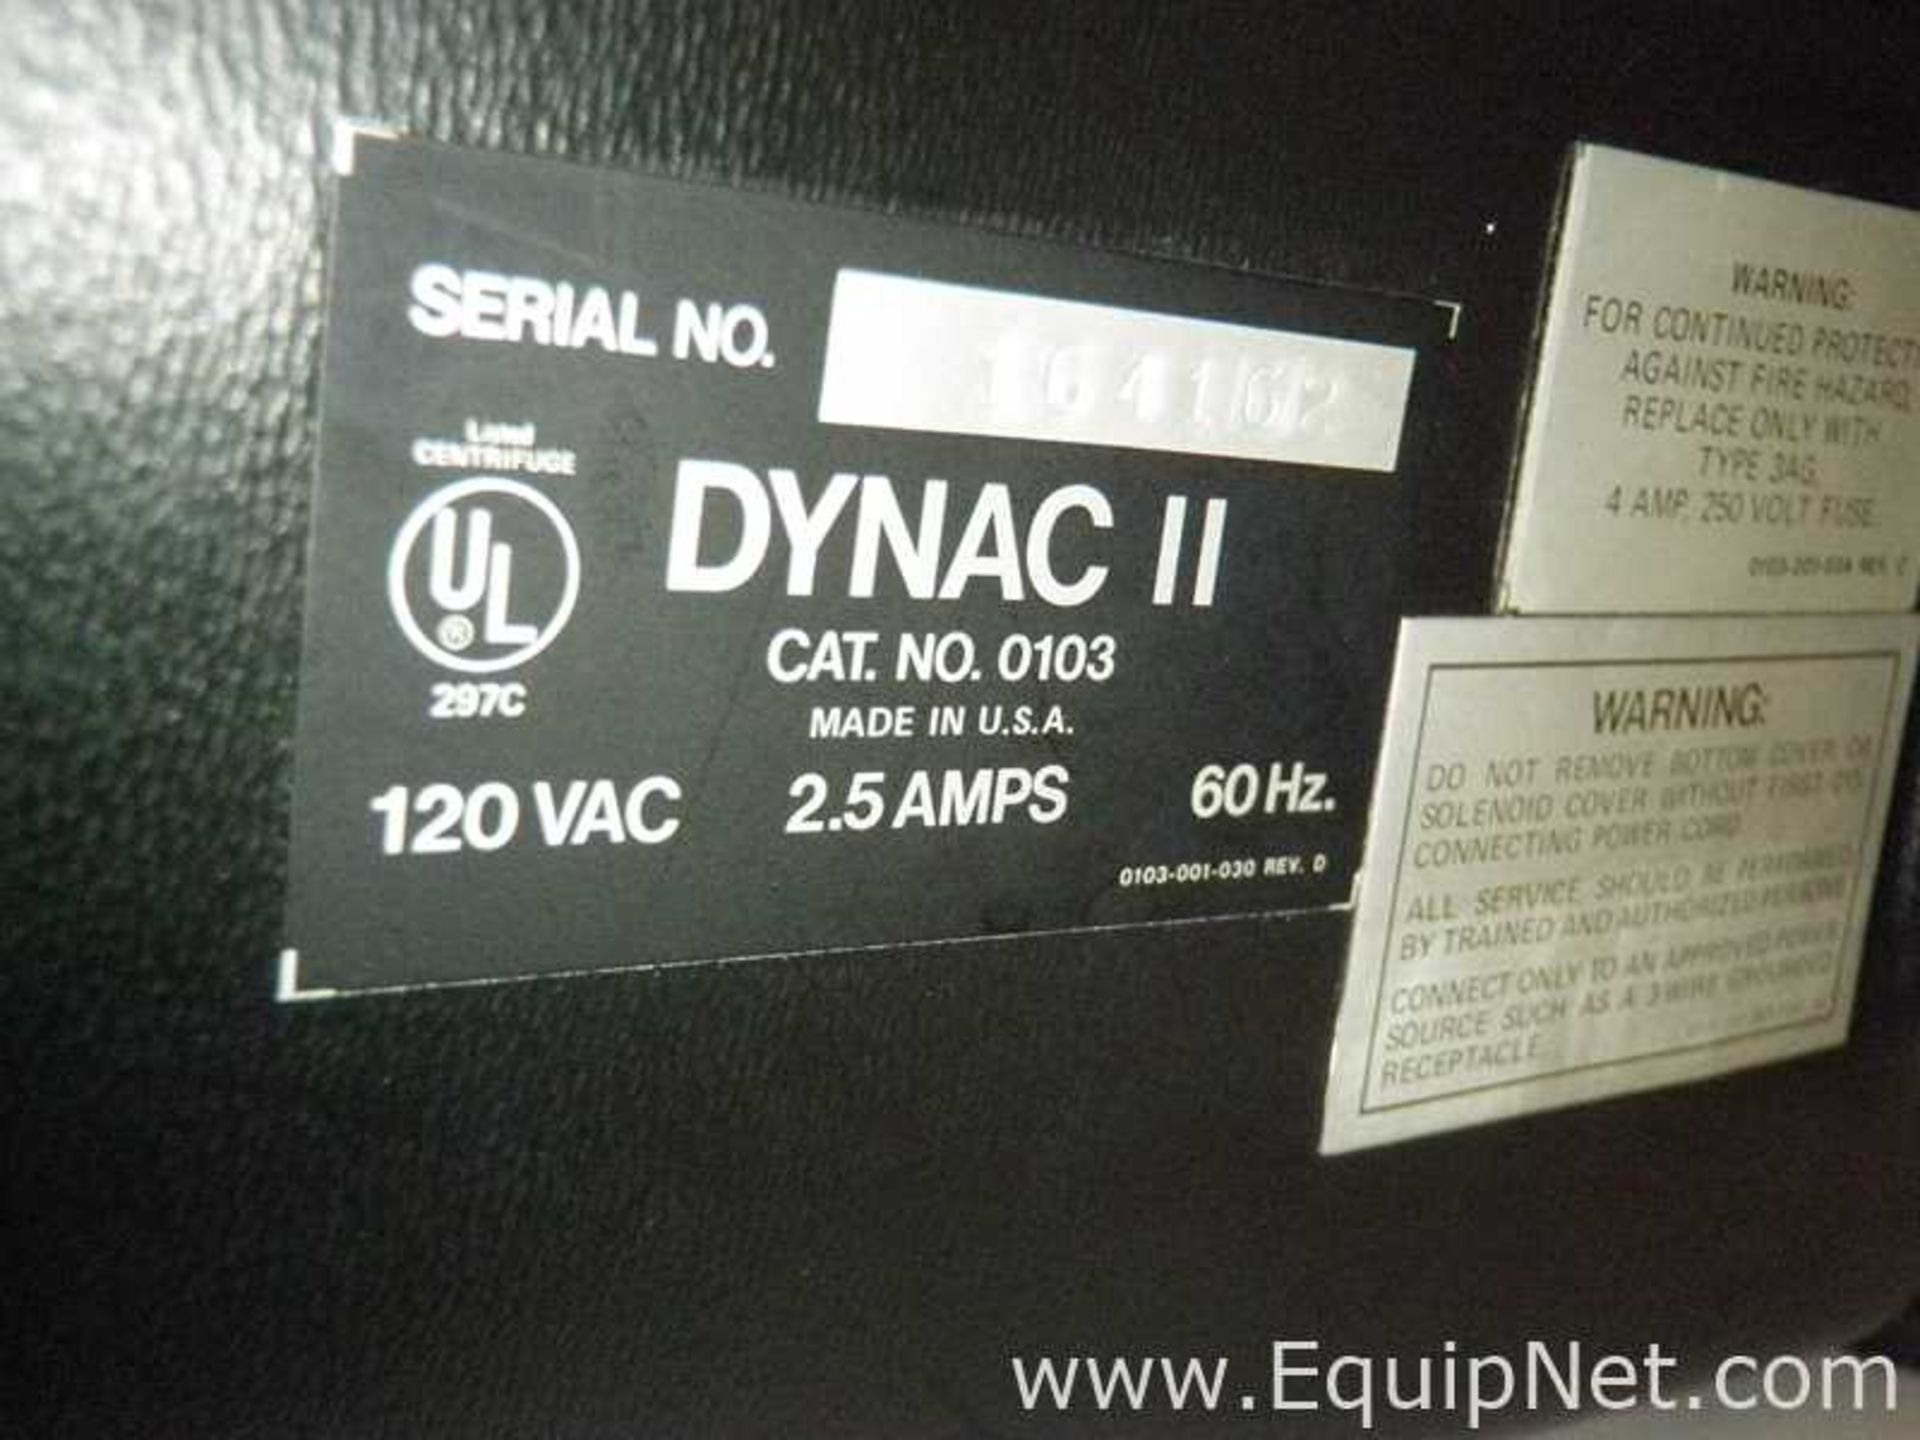 Clay Adams Dynac II Benchtop Centrifuge - Image 4 of 4